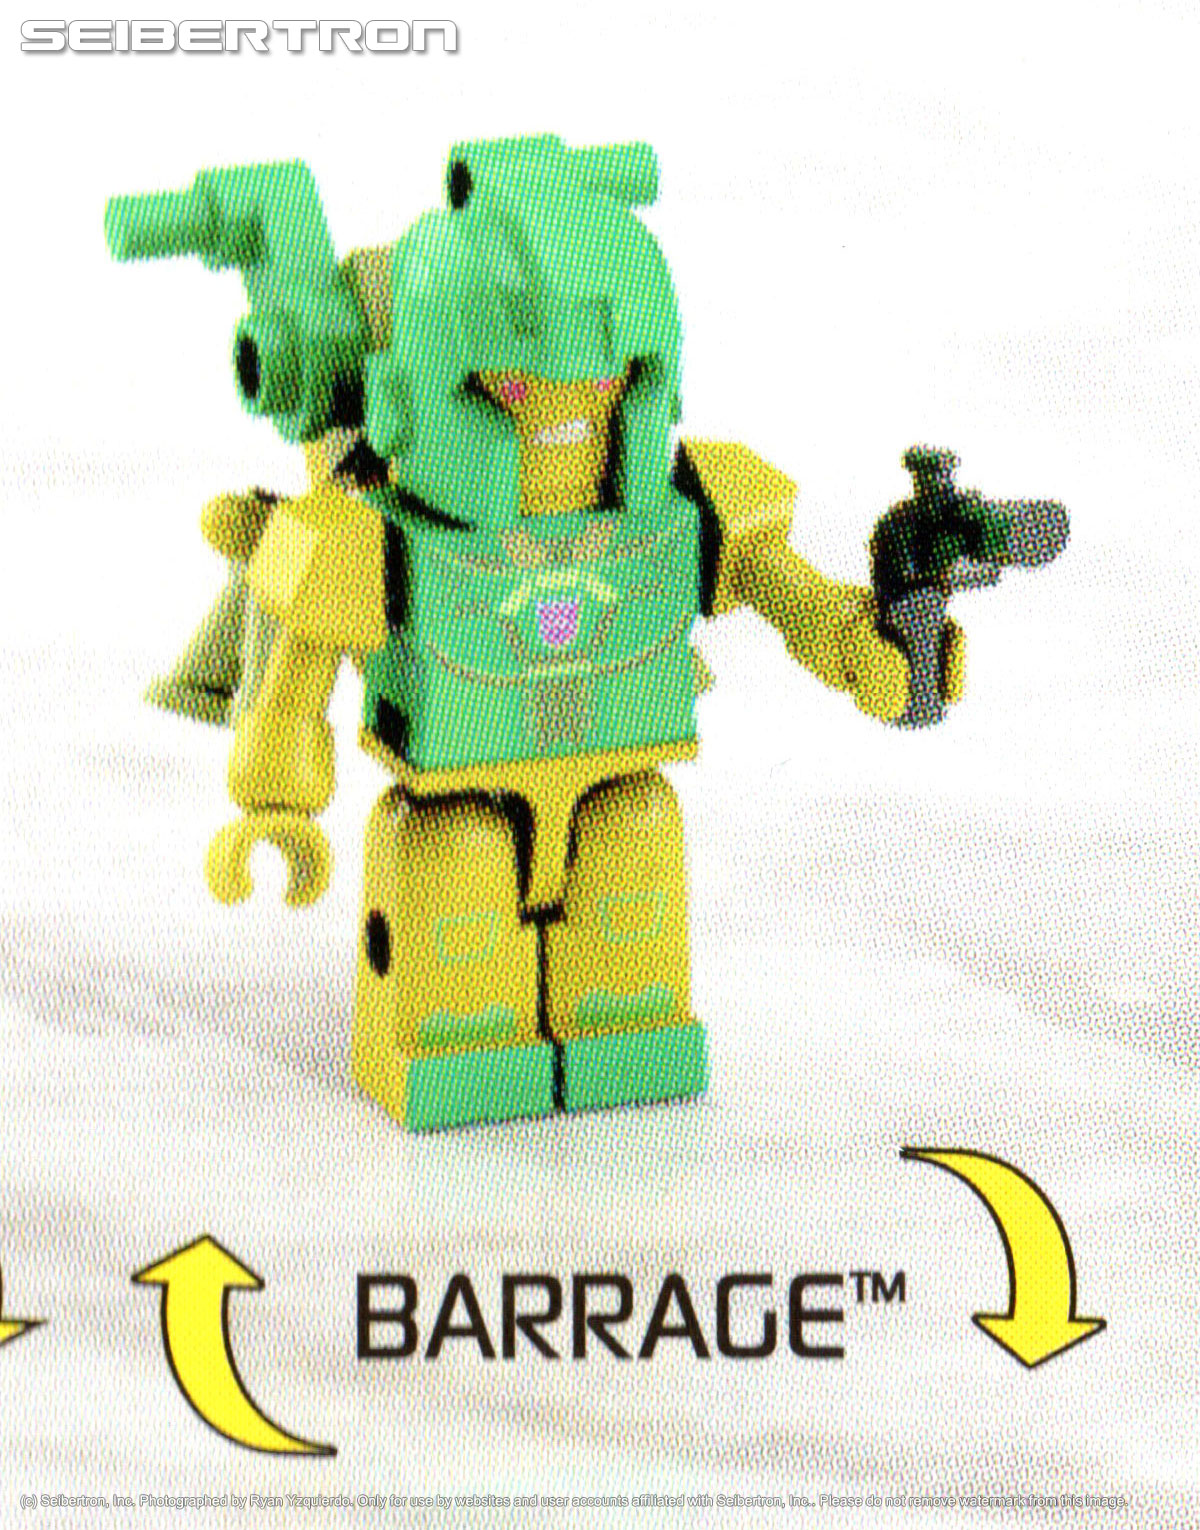 BARRAGE Transformers Kre-o Micro-Changers Series 4 34 Kreon G1 Insecticon New